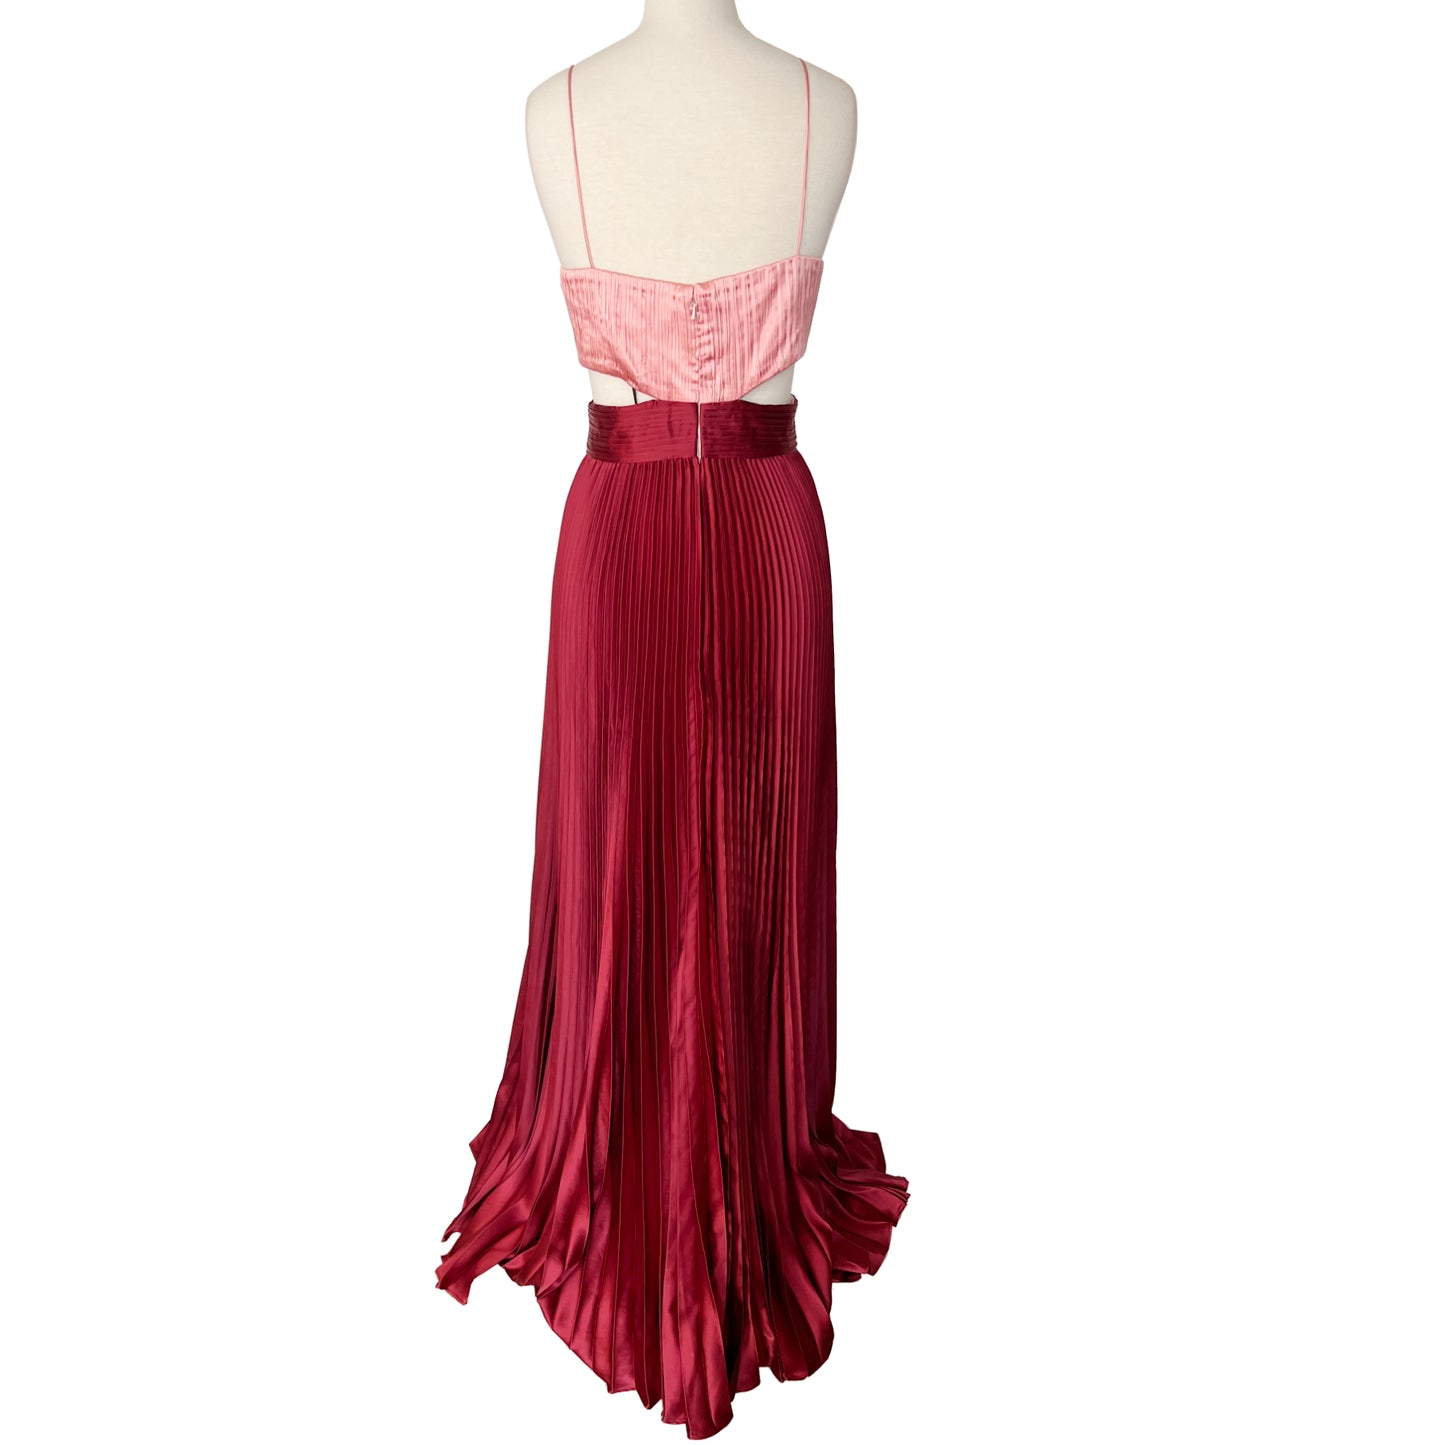 AMUR Elodie Two Toned Cut Out Pleated Satin Gown With Side Slit Long Gown Size US 10